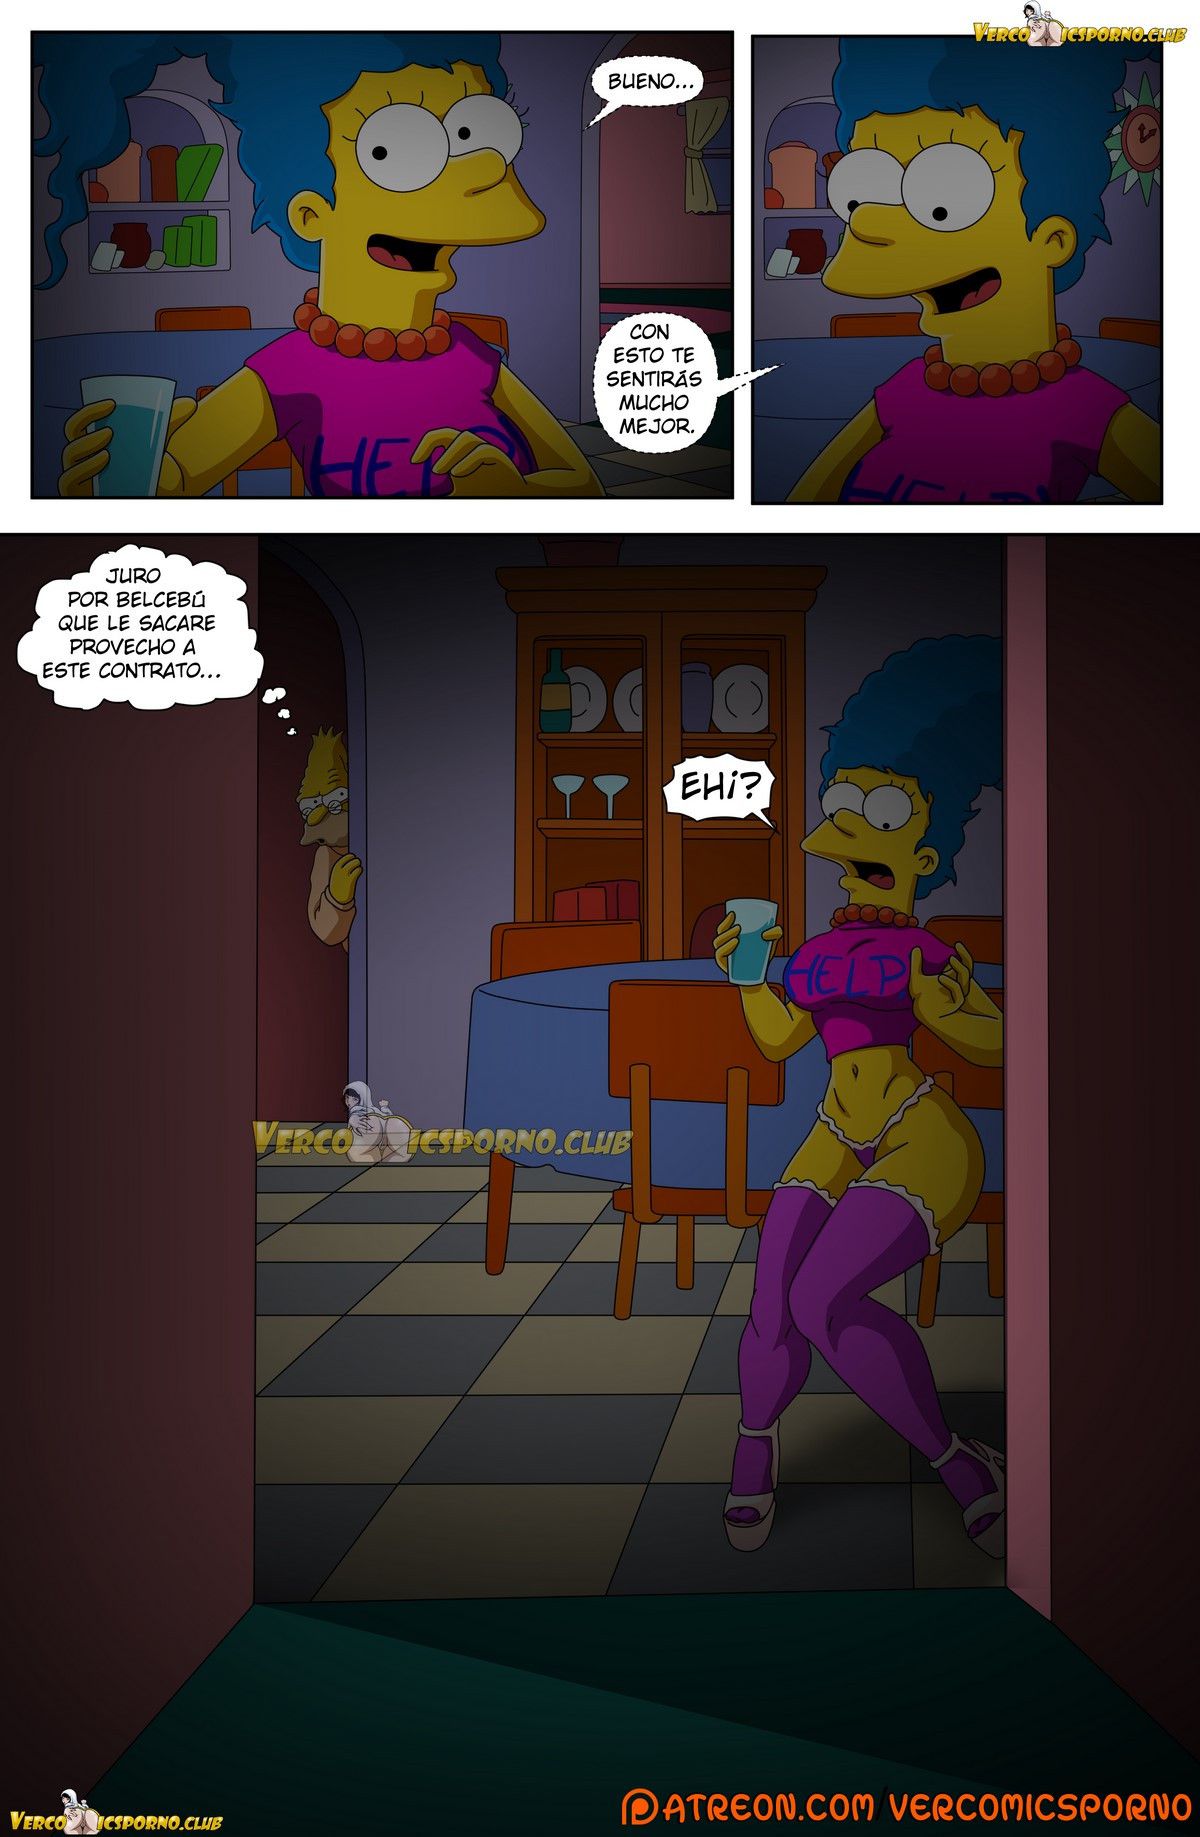 Grandpa and me - [Itooneaxxx] - [Drah Navlag] - [VCP] - [The Simpsons] 51